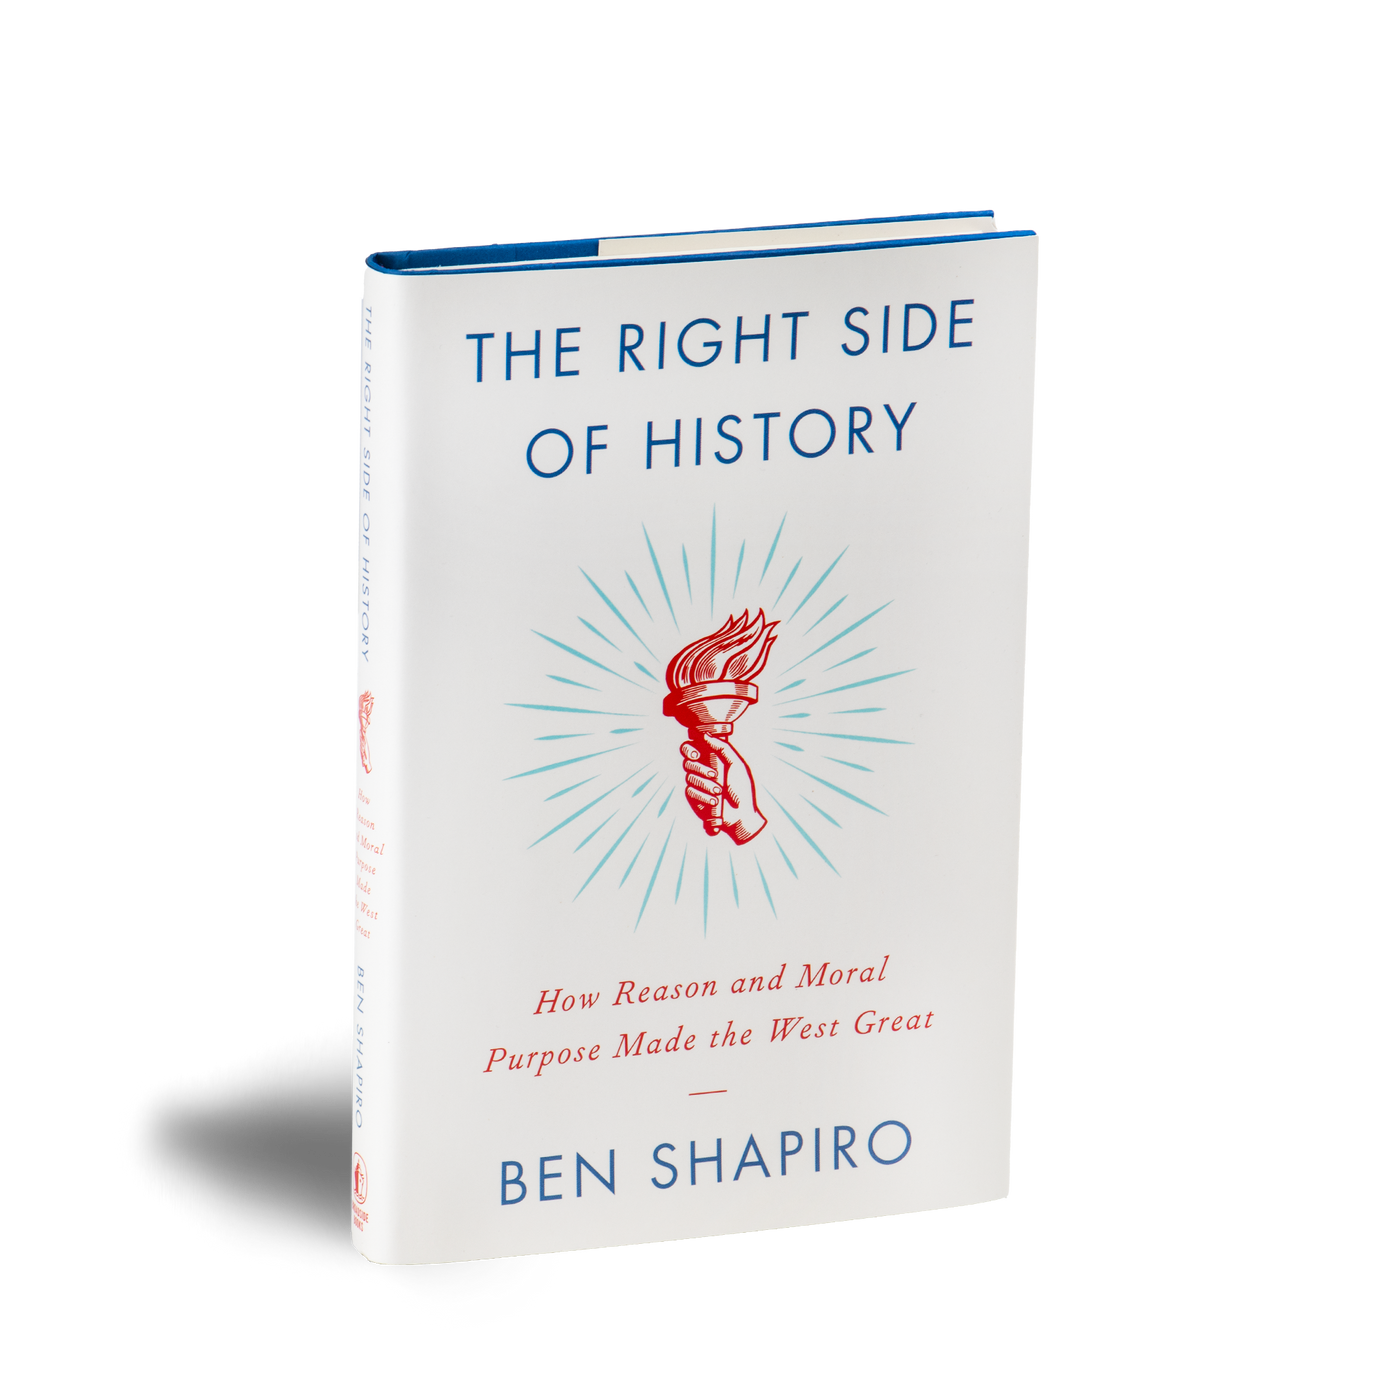 The Right Side of History by Ben Shapiro